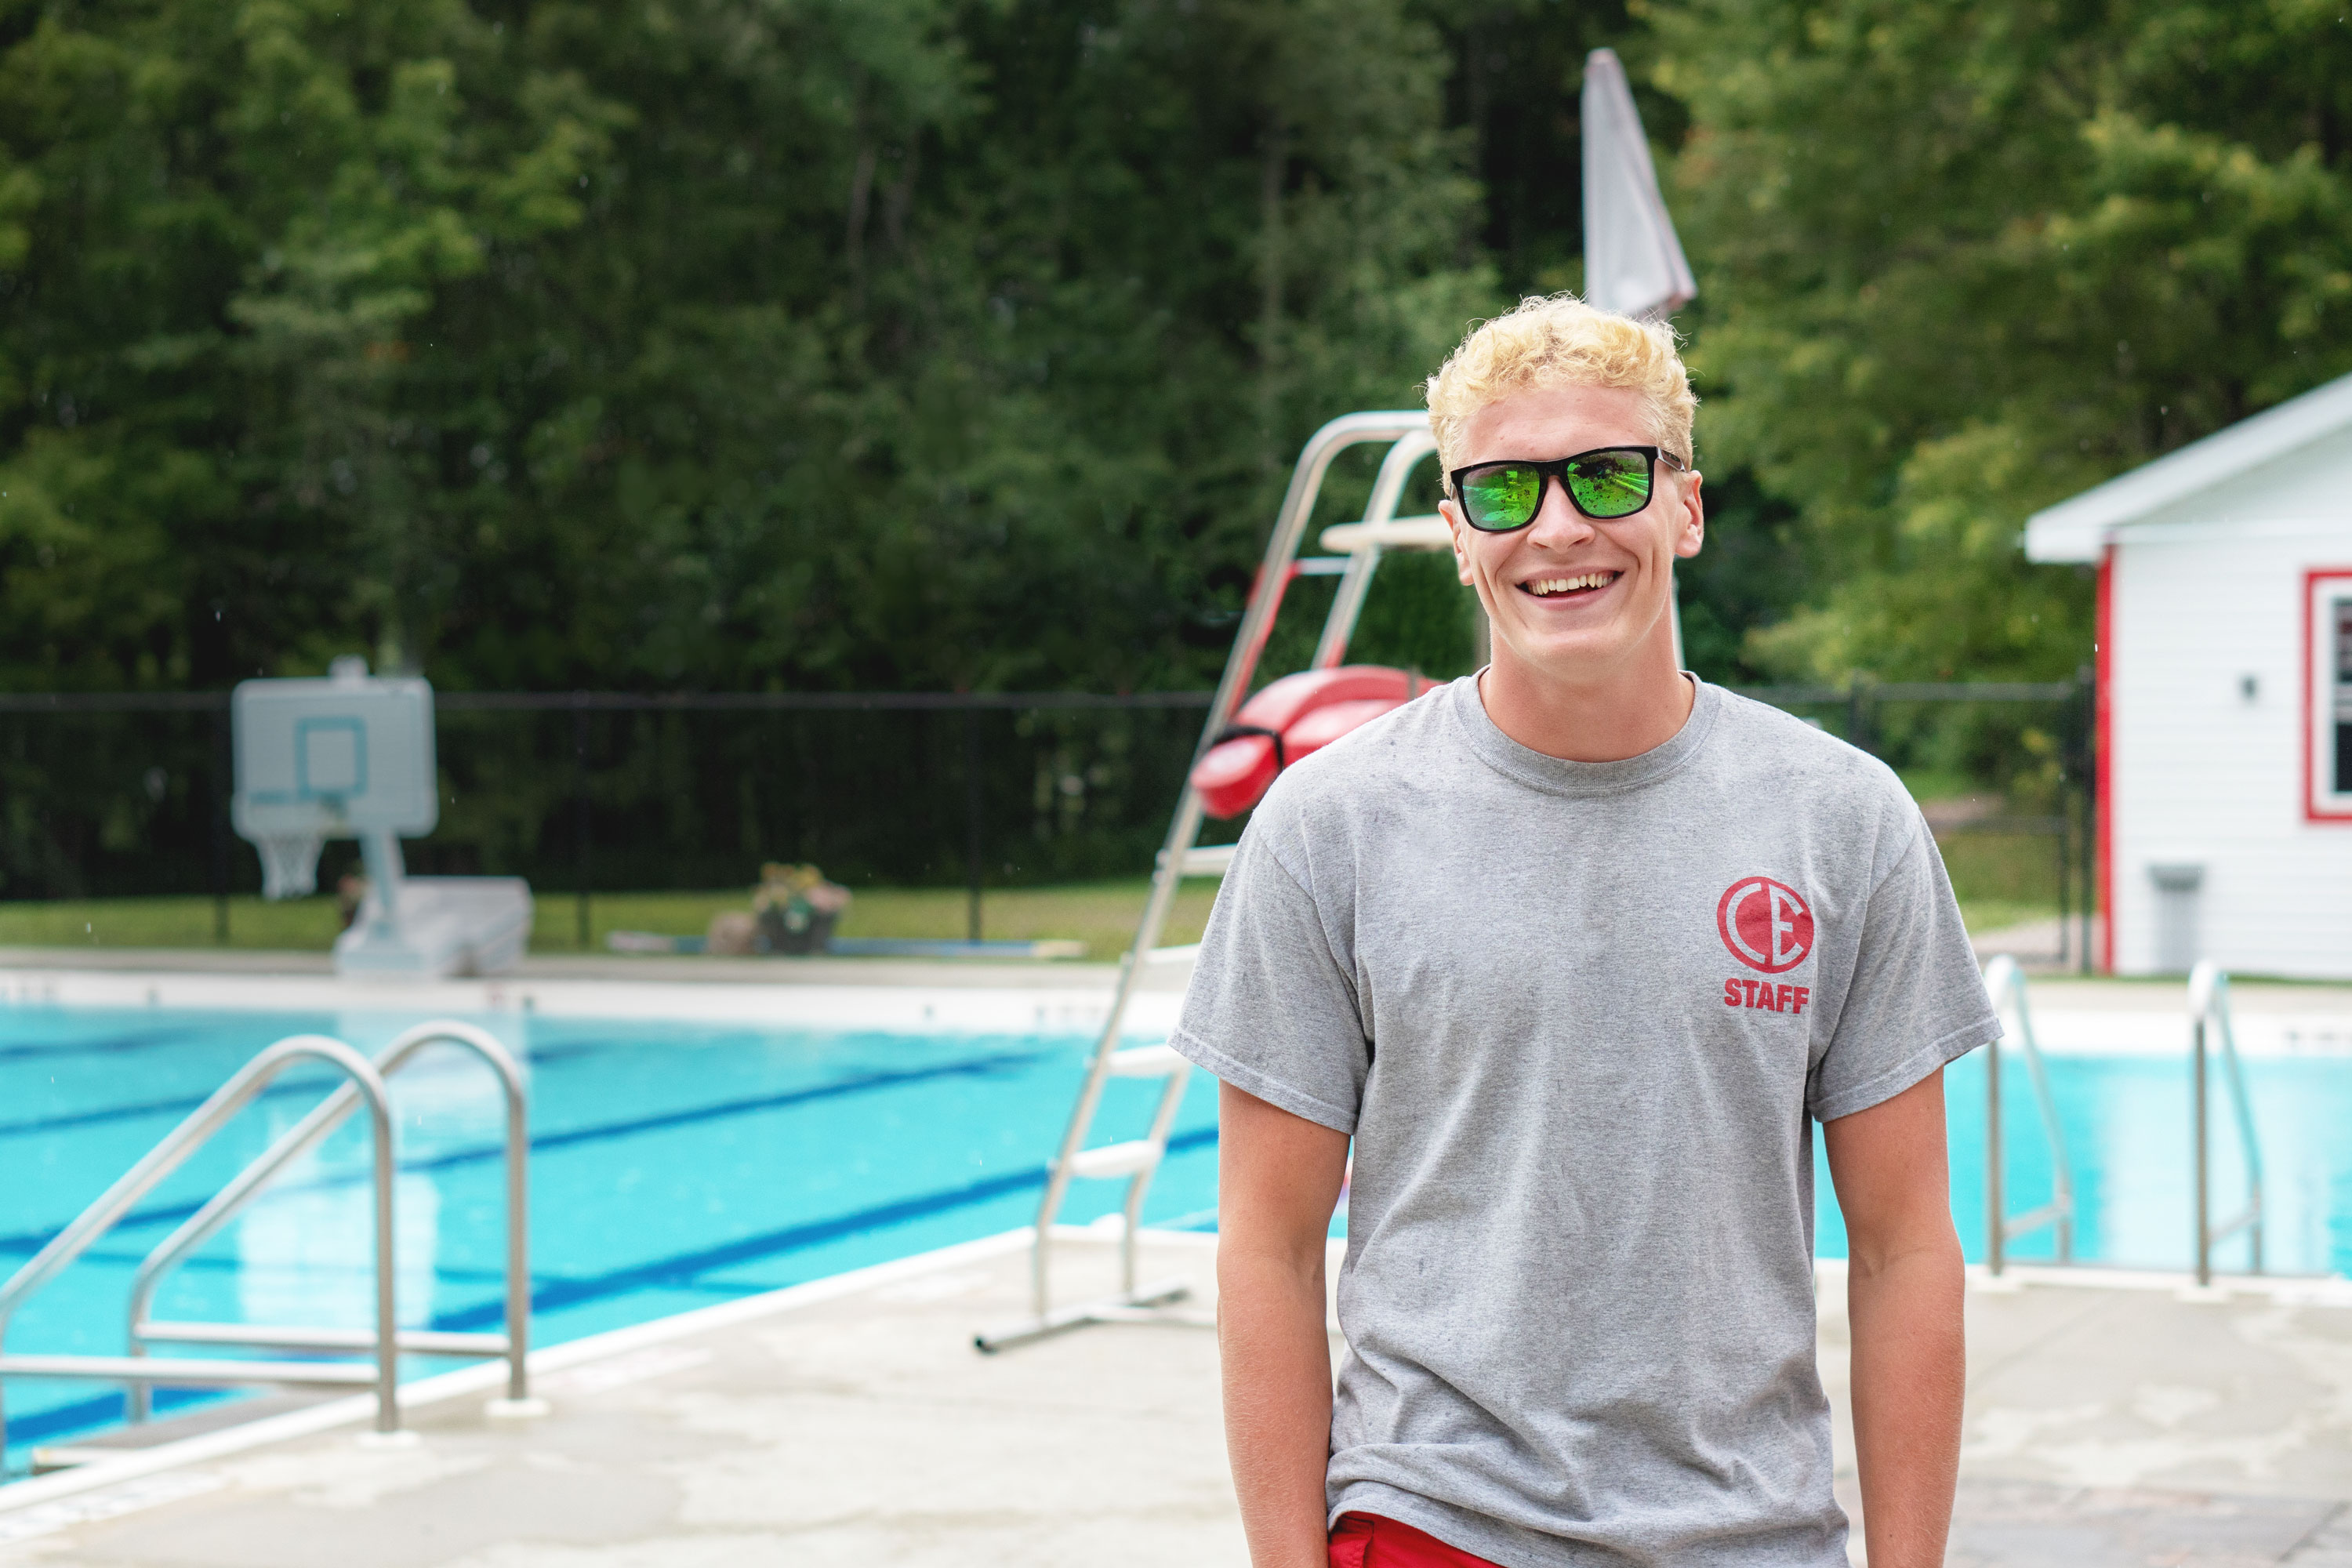 A student lifeguard next to a pool at summer camp.